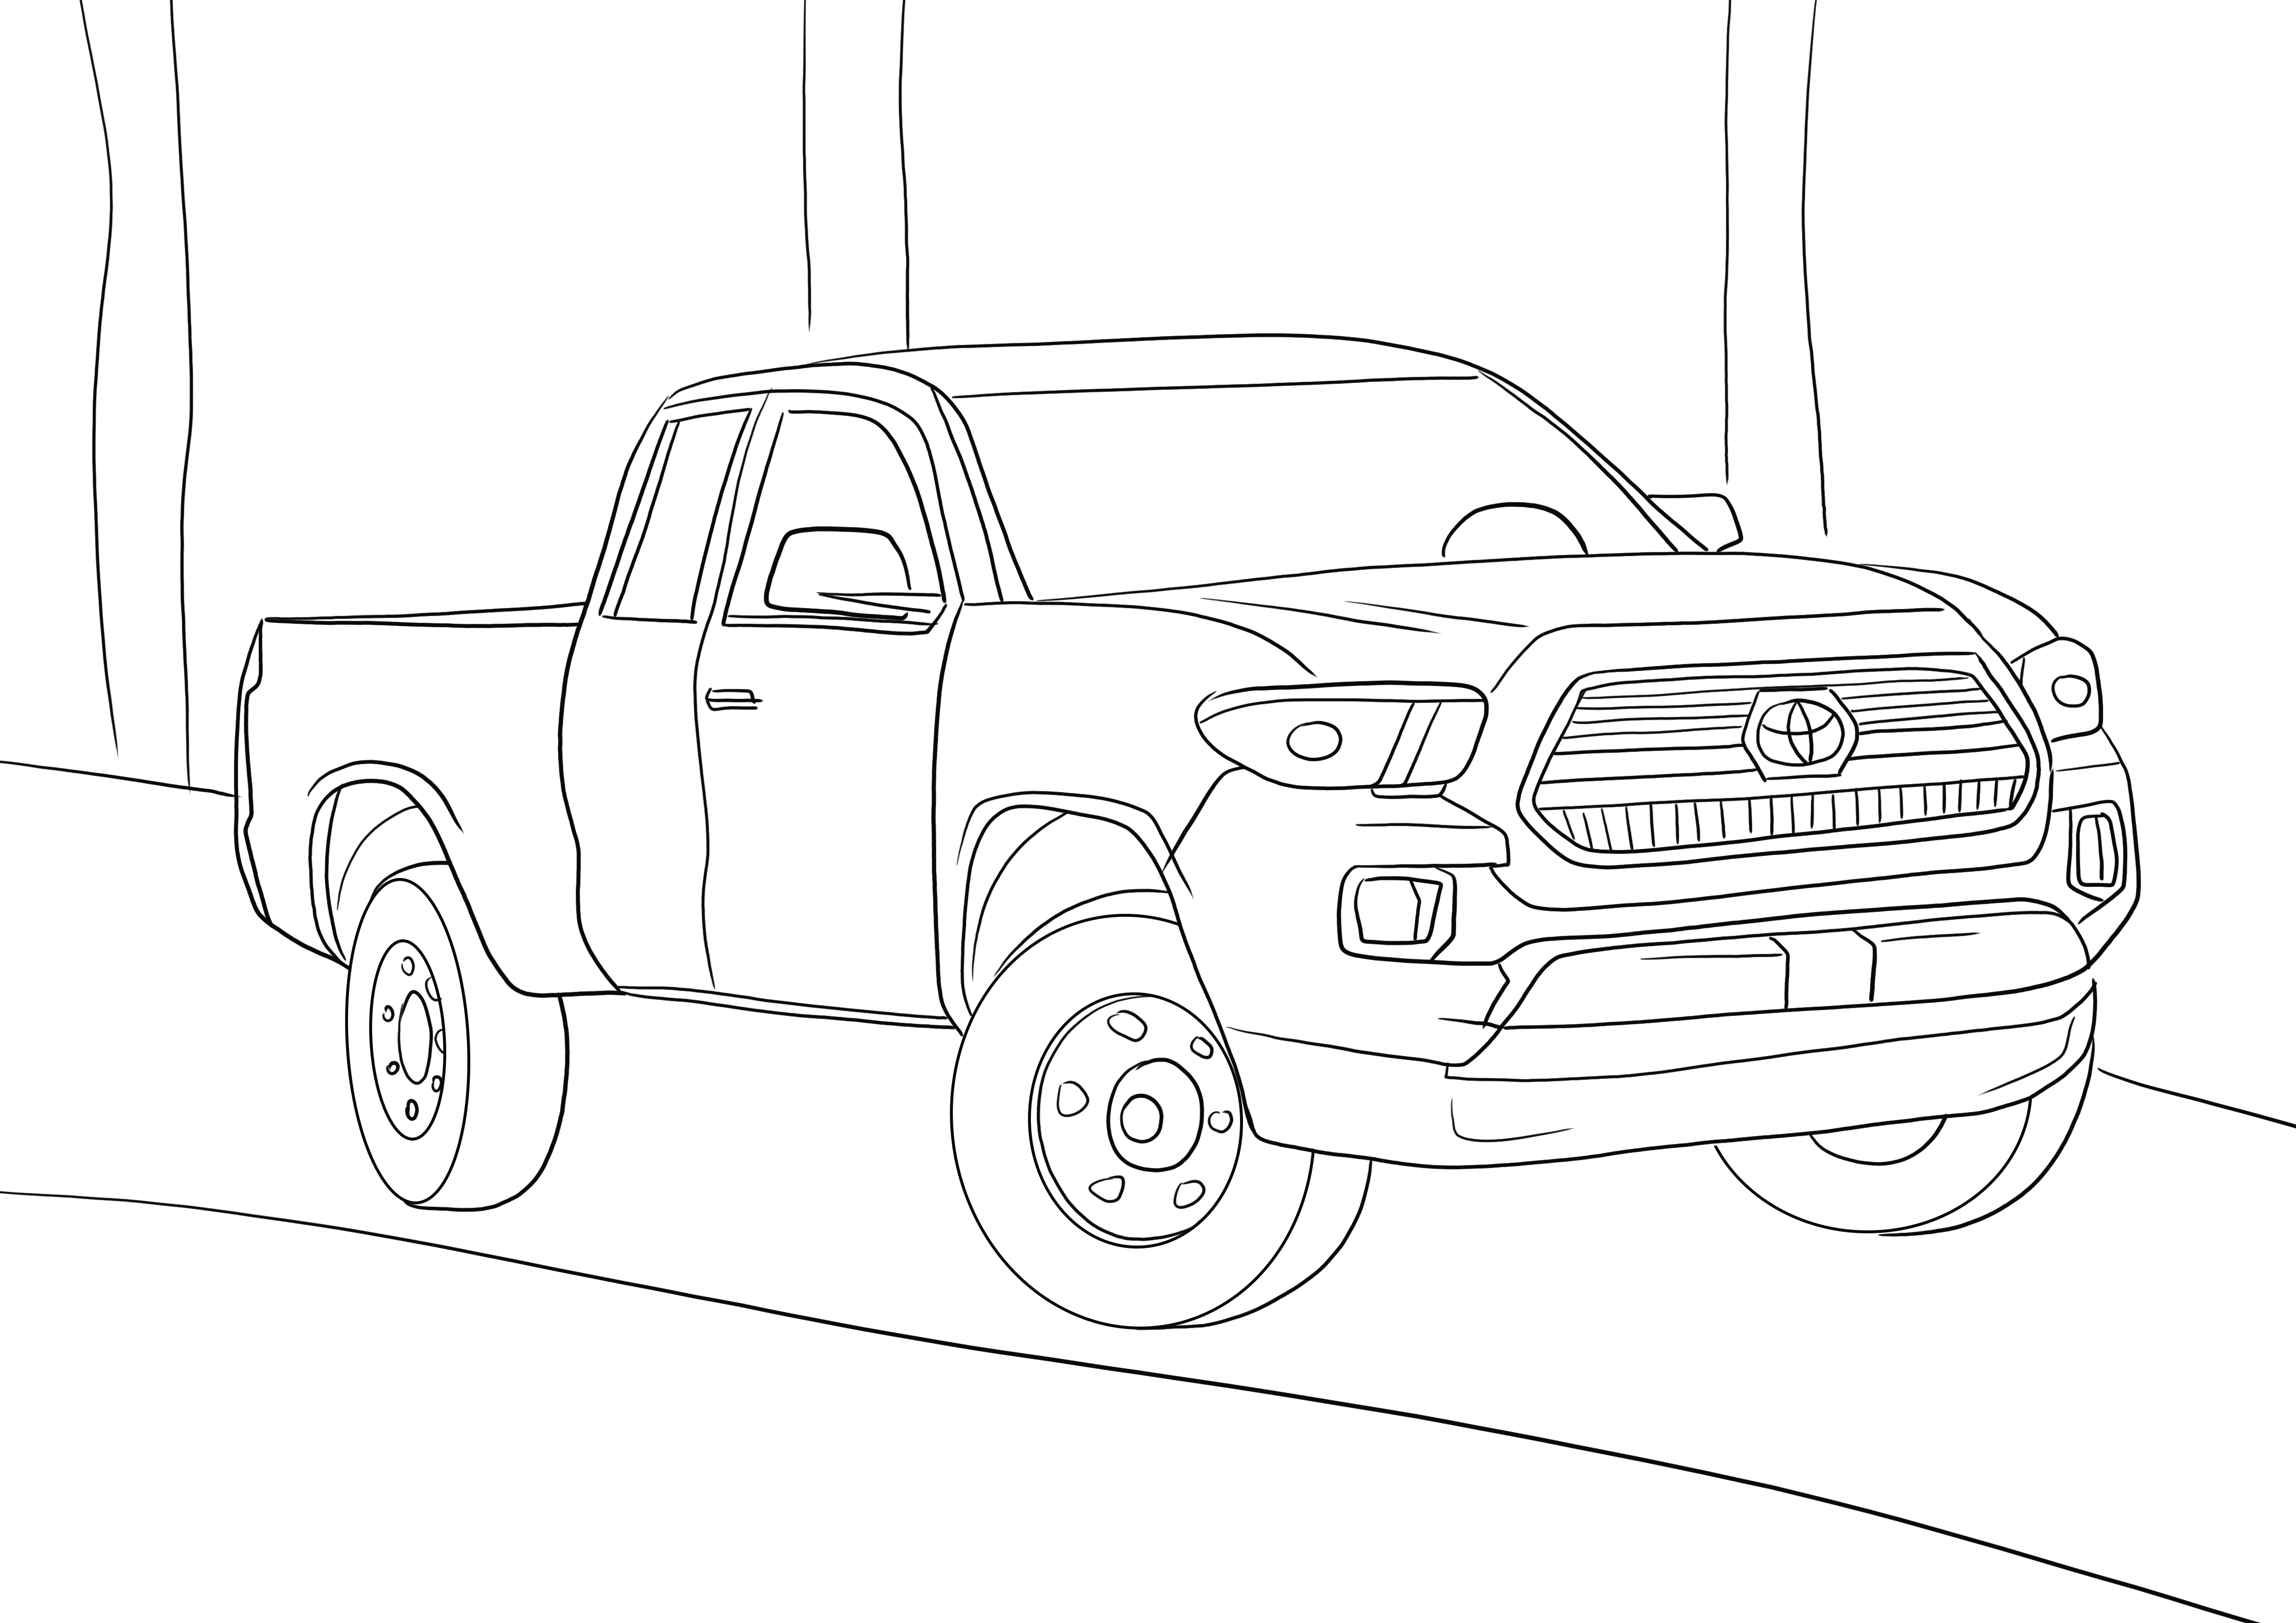 Free toyota tacoma coloring and printing image for fast car lovers